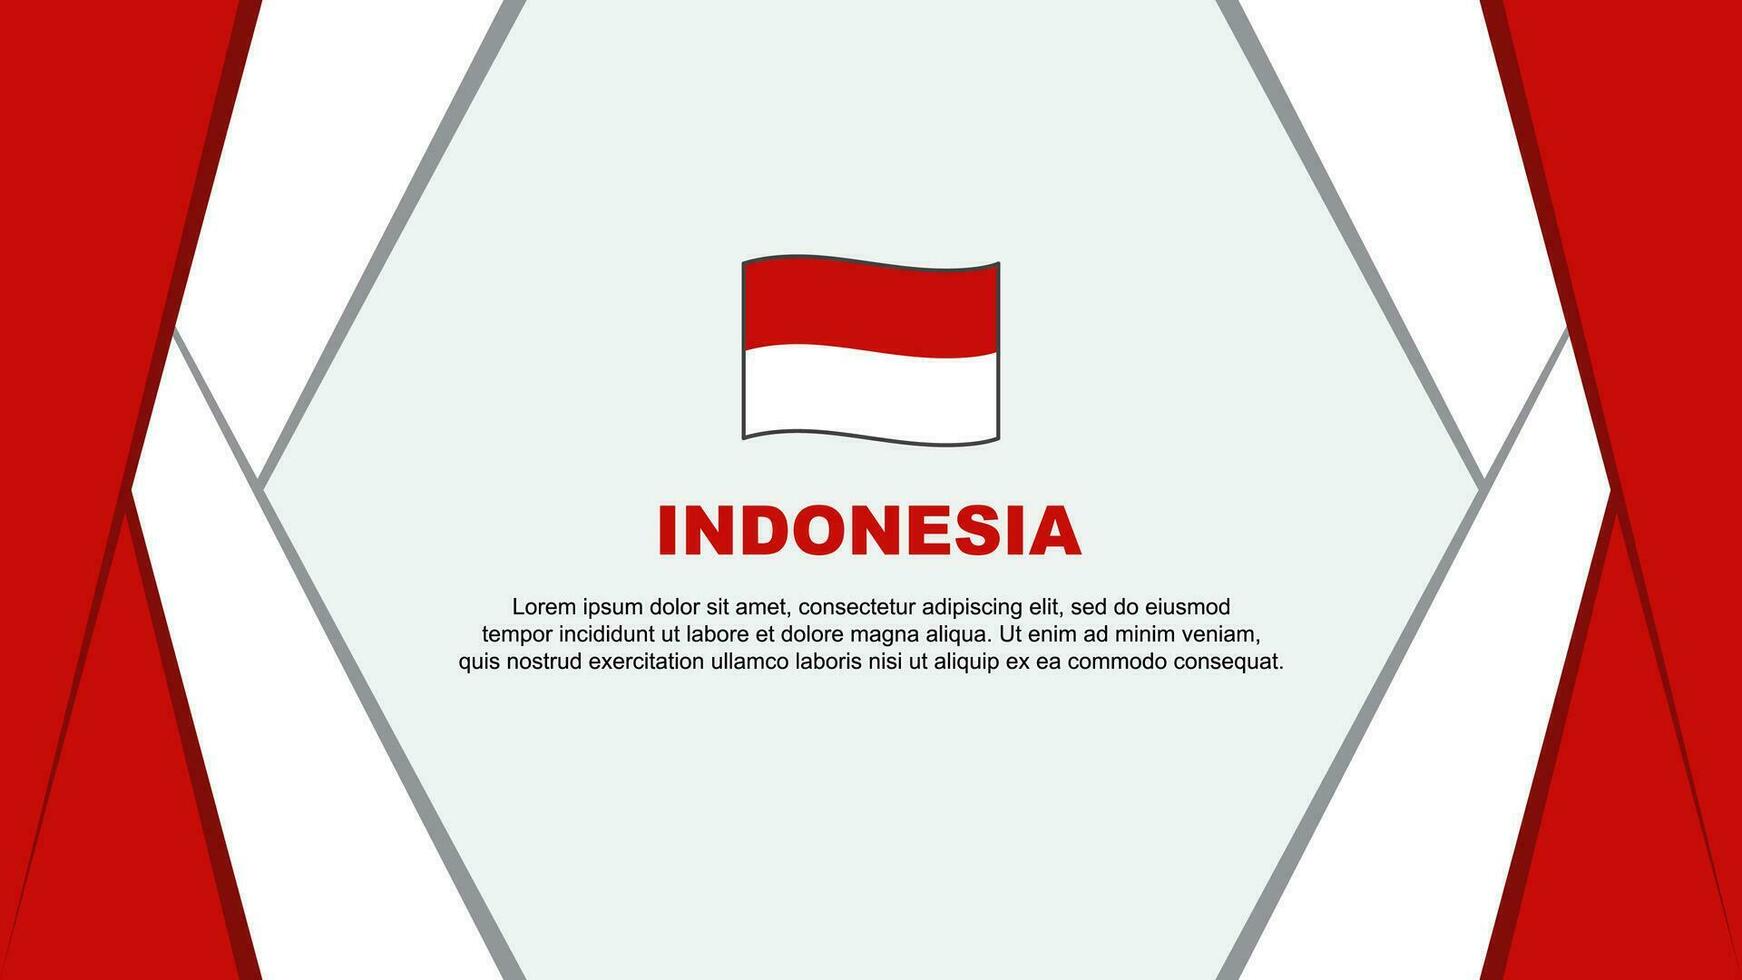 Indonesia Flag Abstract Background Design Template. Indonesia Independence Day Banner Cartoon Vector Illustration. Indonesia Flag